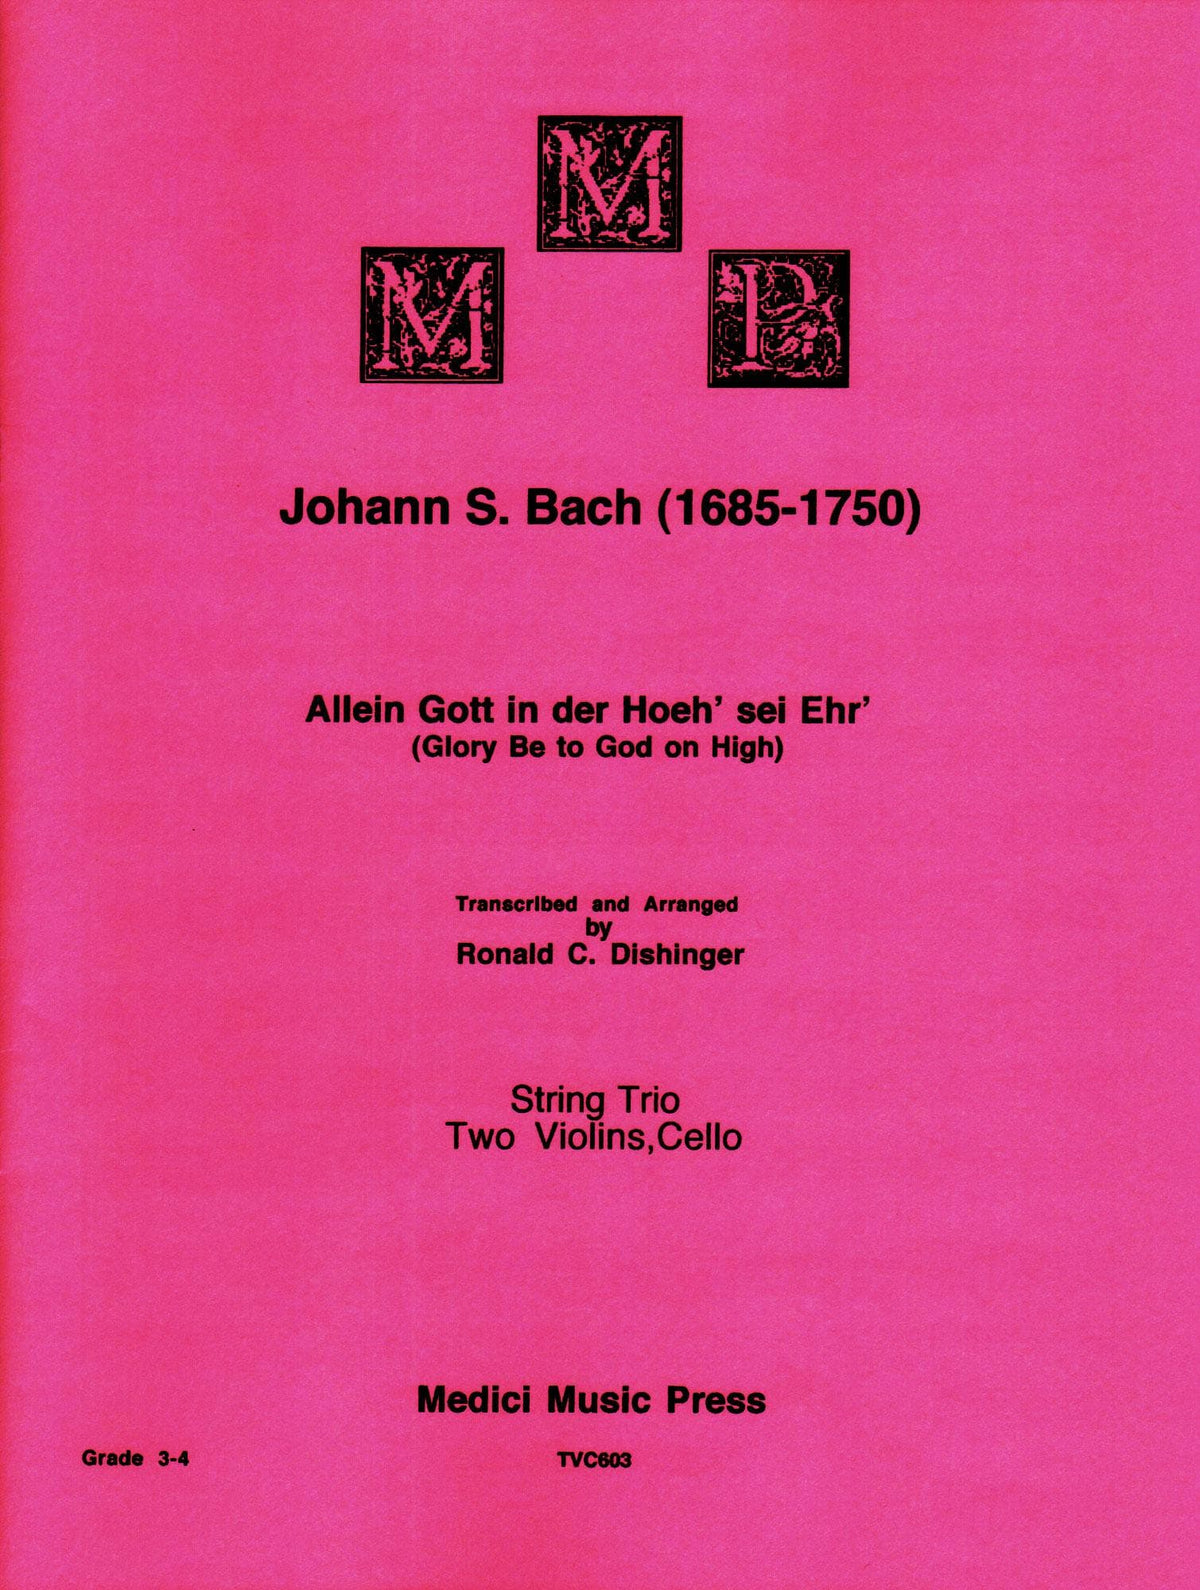 Bach, J.S. - Glory Be to God on High for Two Violins and Cello - Medici Music Press Publication